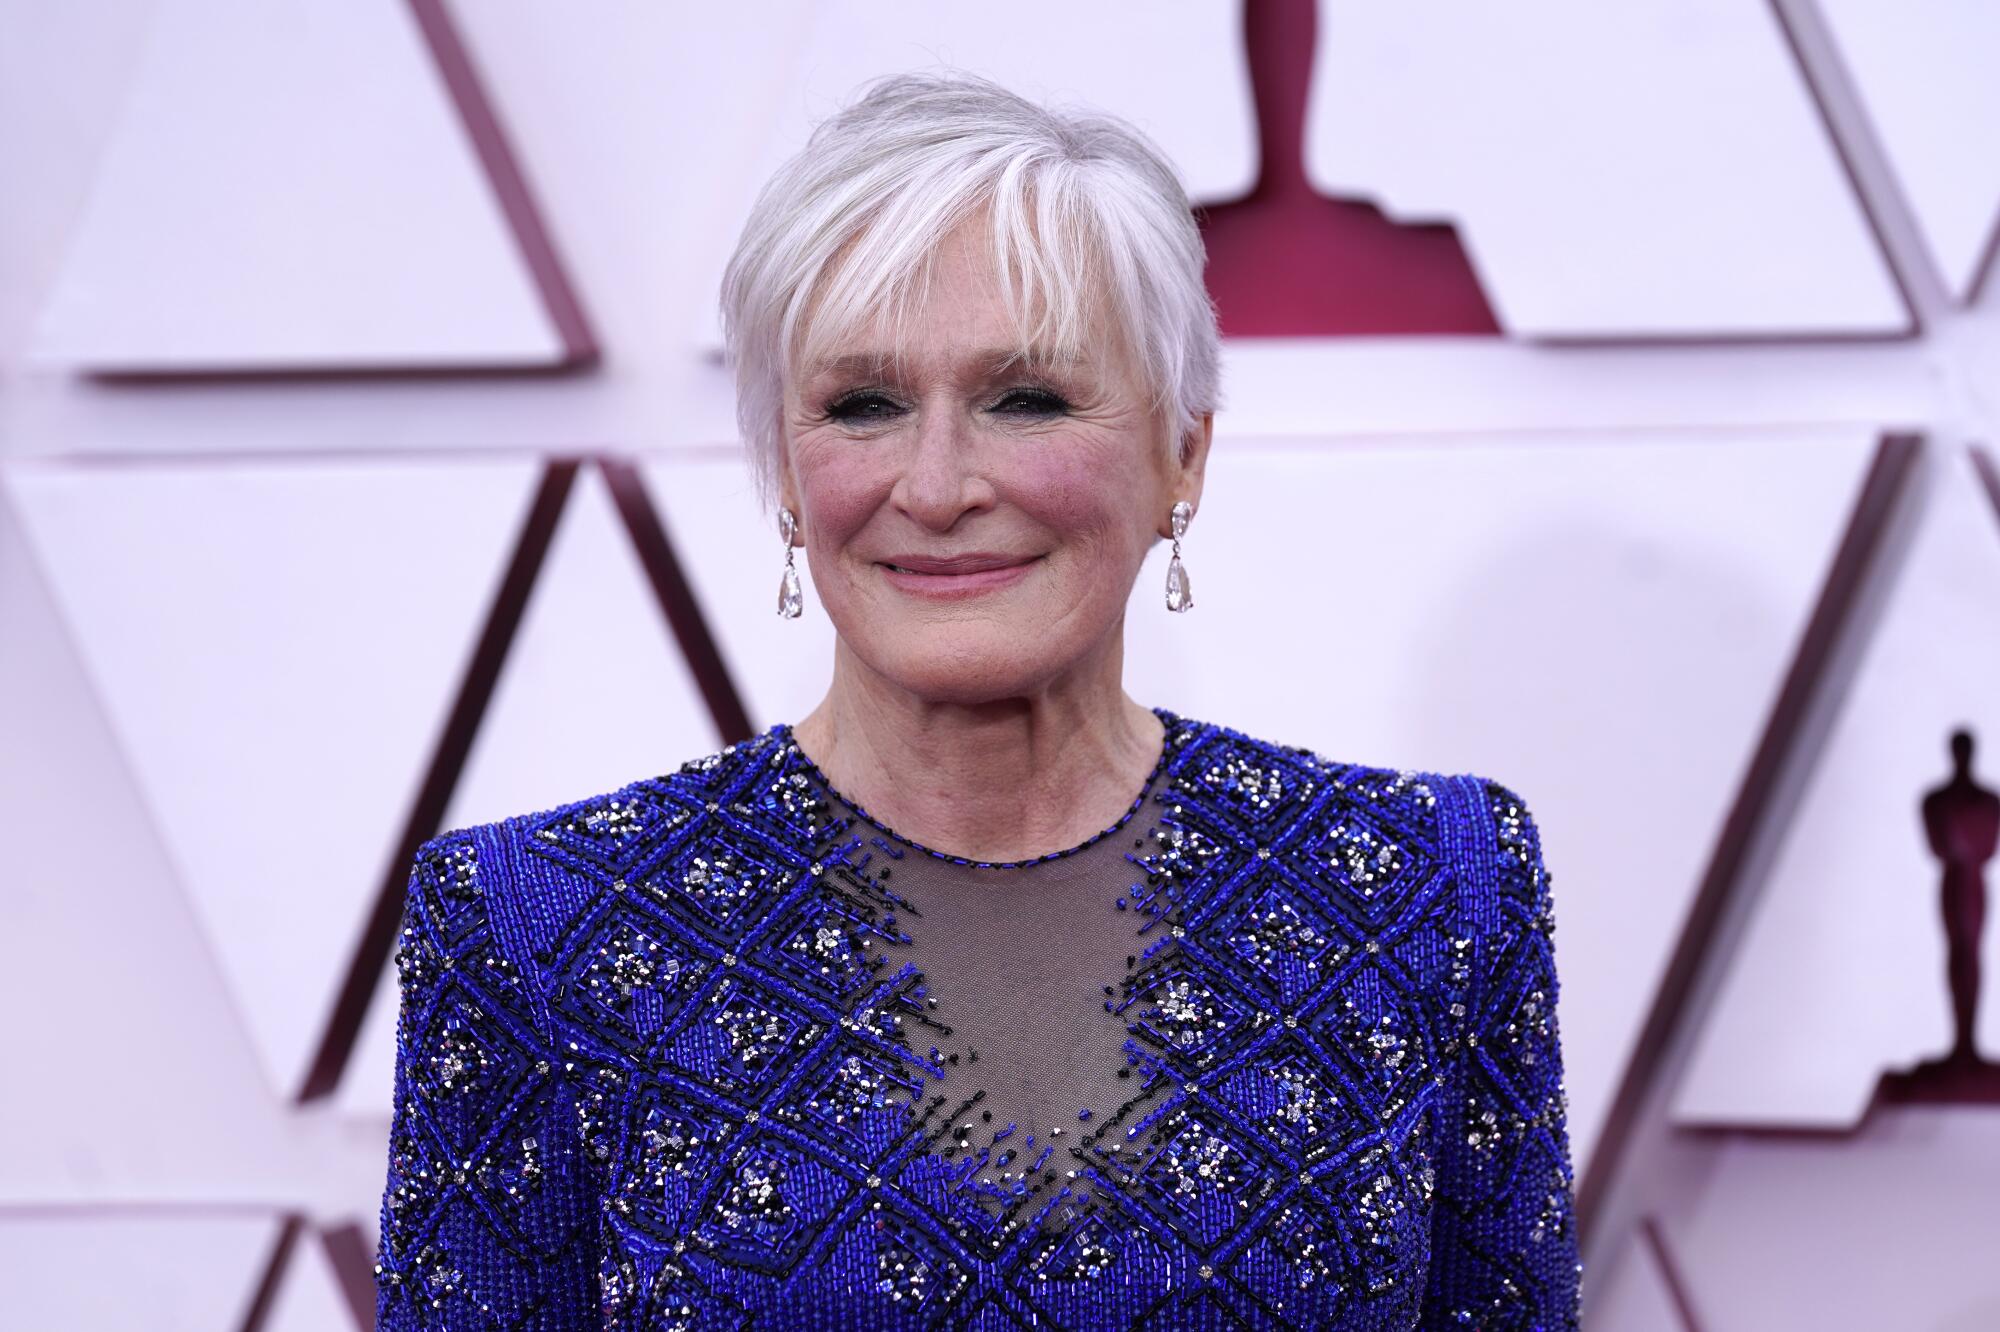 Wearing a blue patterned tunic with silk pants and evening gloves, Glenn Close arrives at the Oscars.